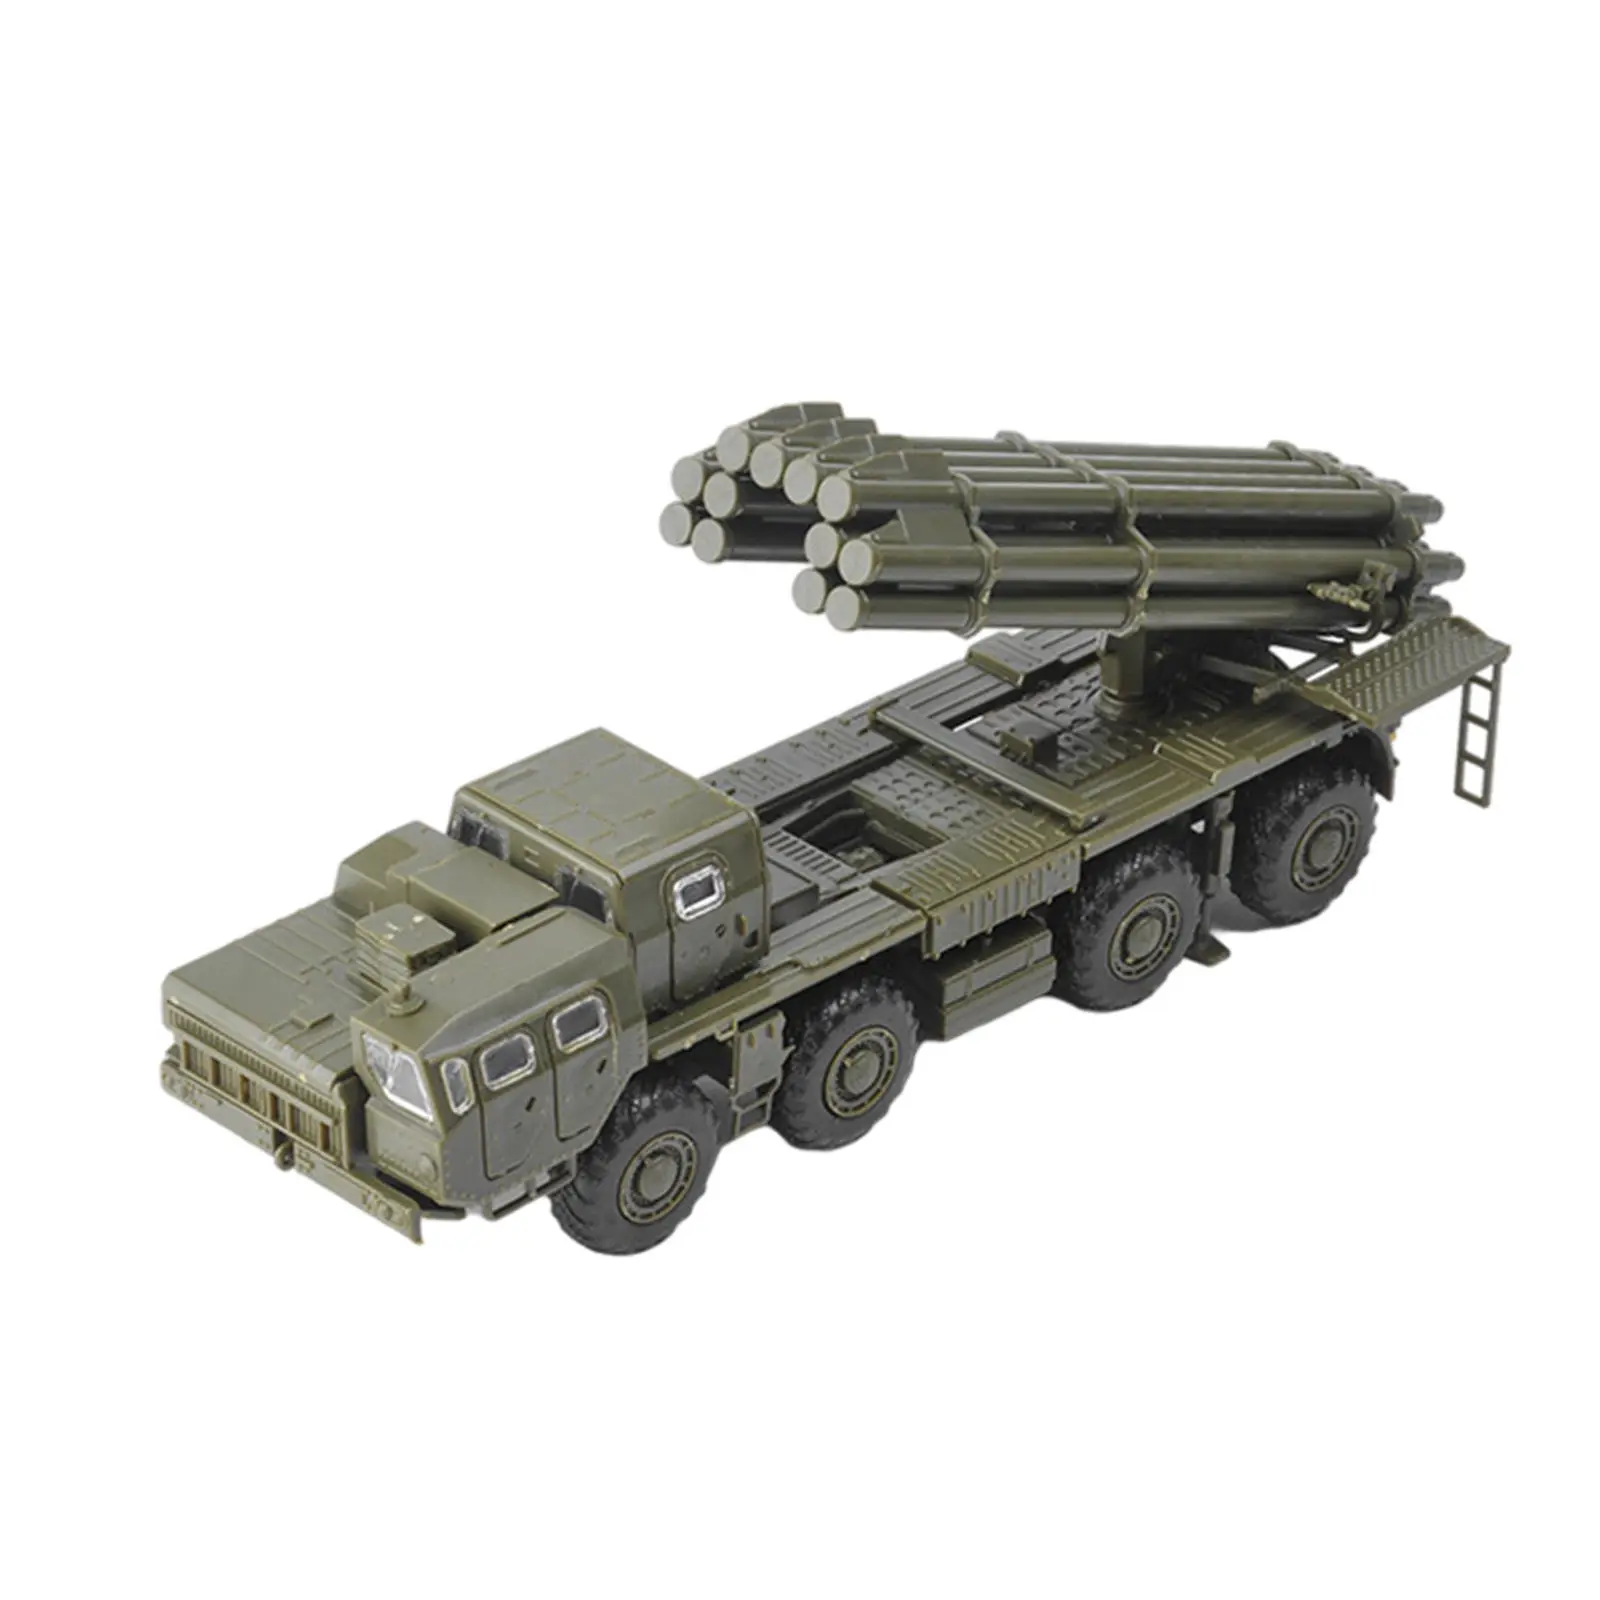 1:72 Russian Rocket Launcher Model Collection Display Vehicle Classic Puzzle Building Kit Assembled Truck Home Decor Ornament